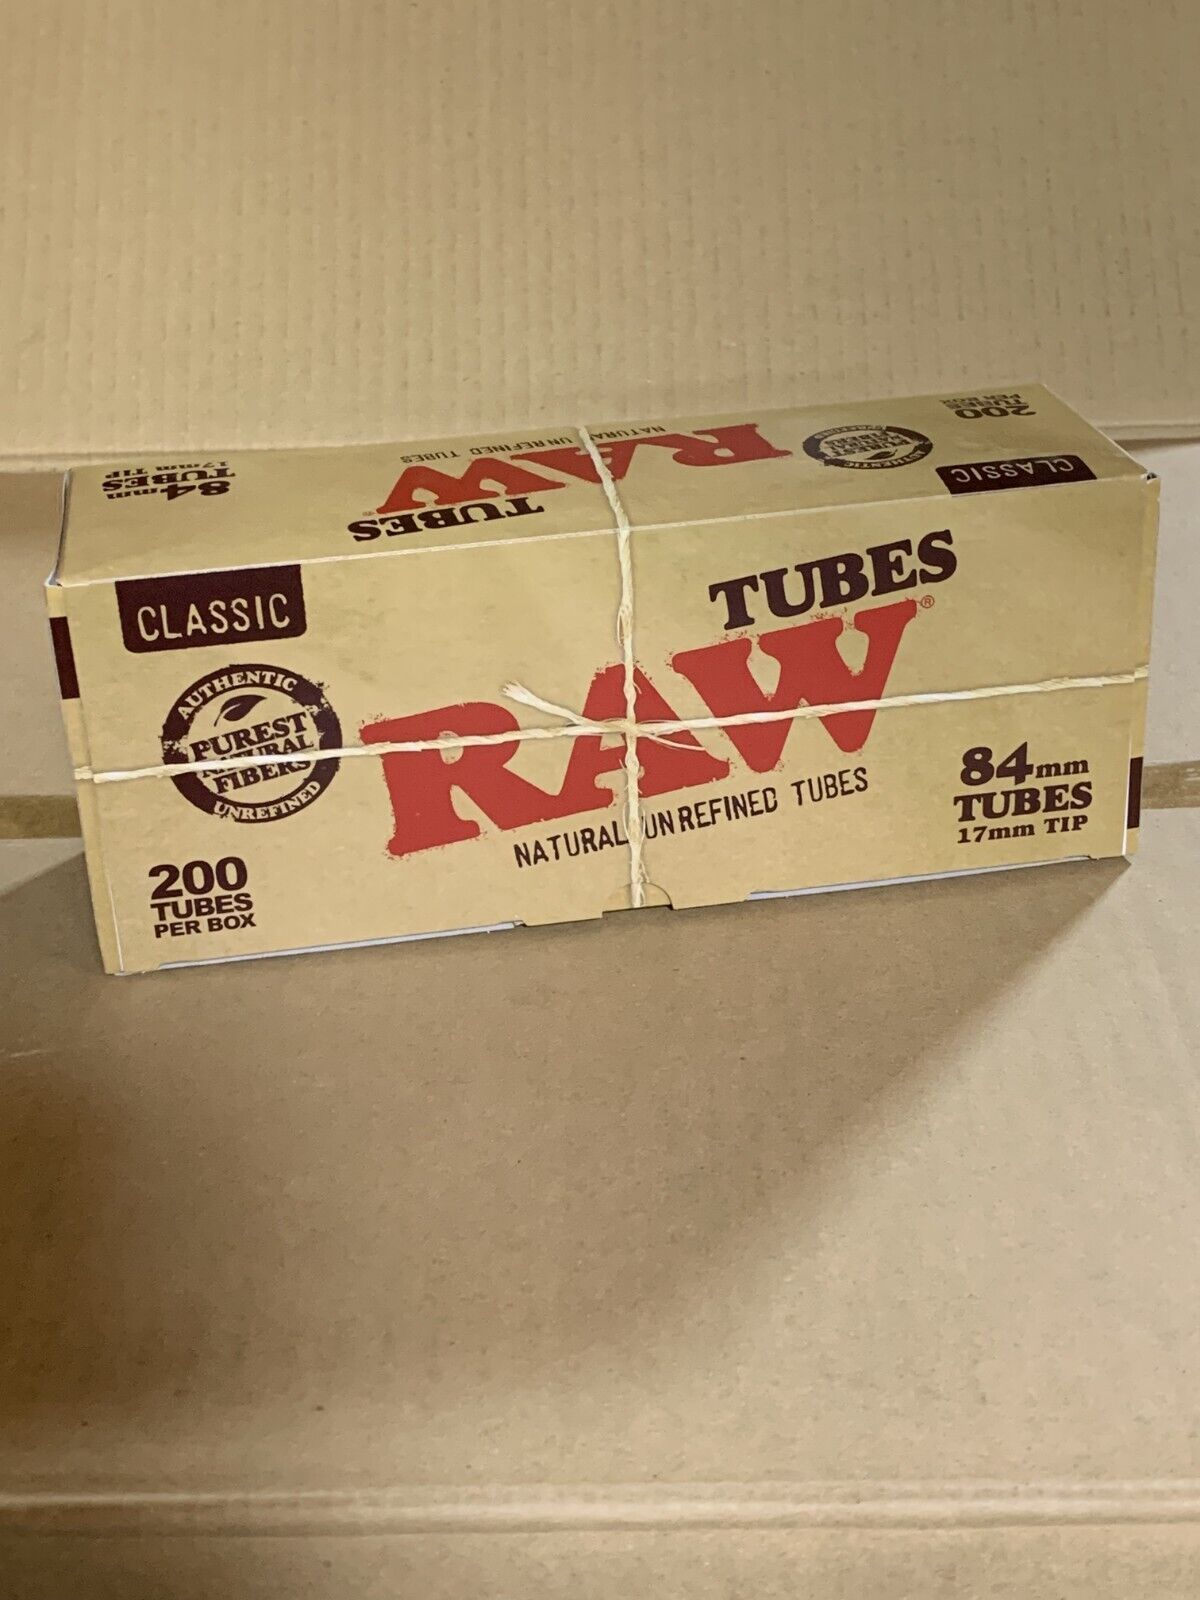 RAW Cigarette TUBES - BOX of 200 - 84mm/ 17mm tip - RAWthentic - Direct Sourced